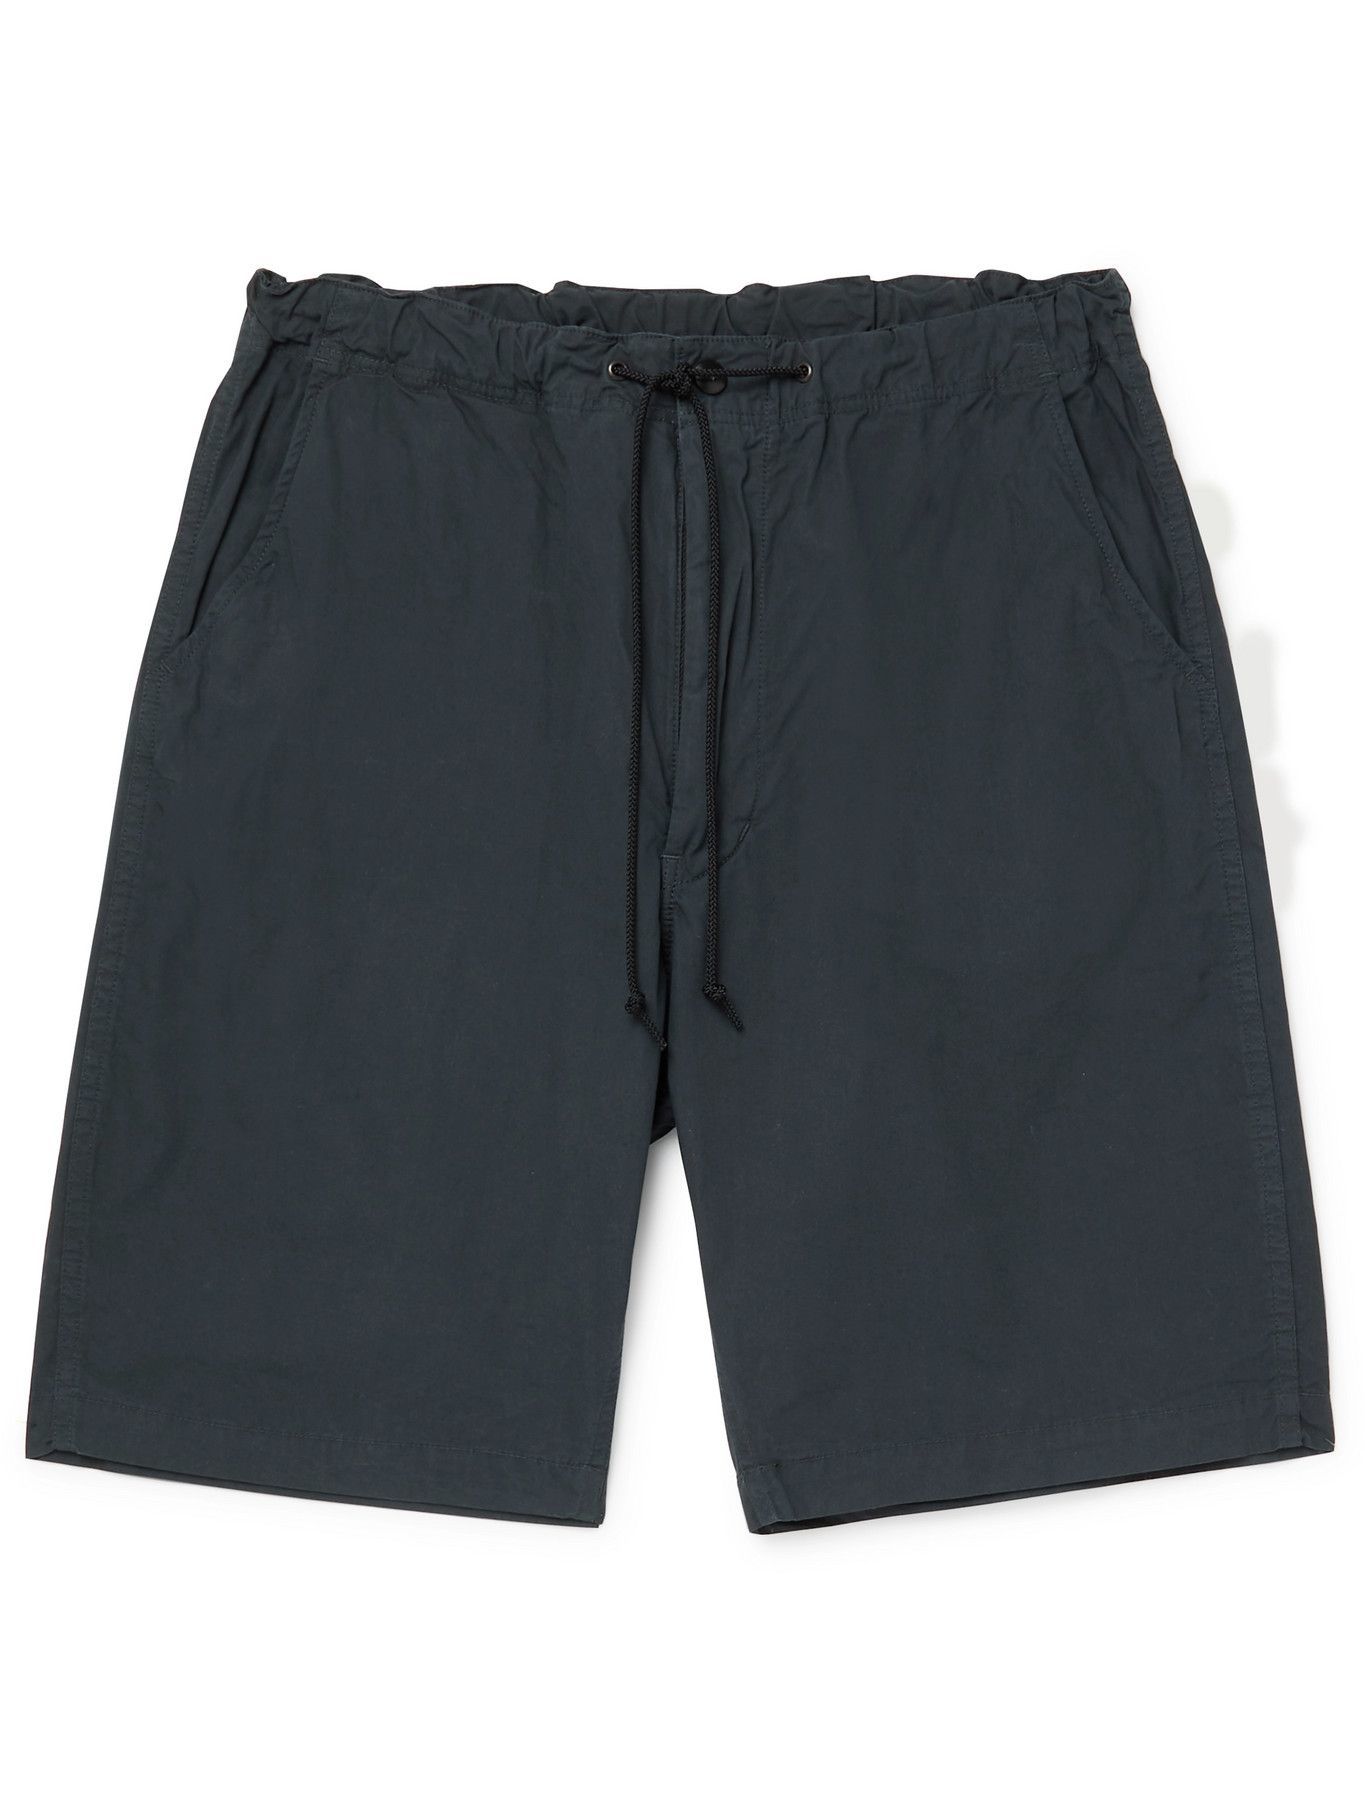 ORSLOW - New Yorker Cotton Drawstring Shorts - Gray orSlow